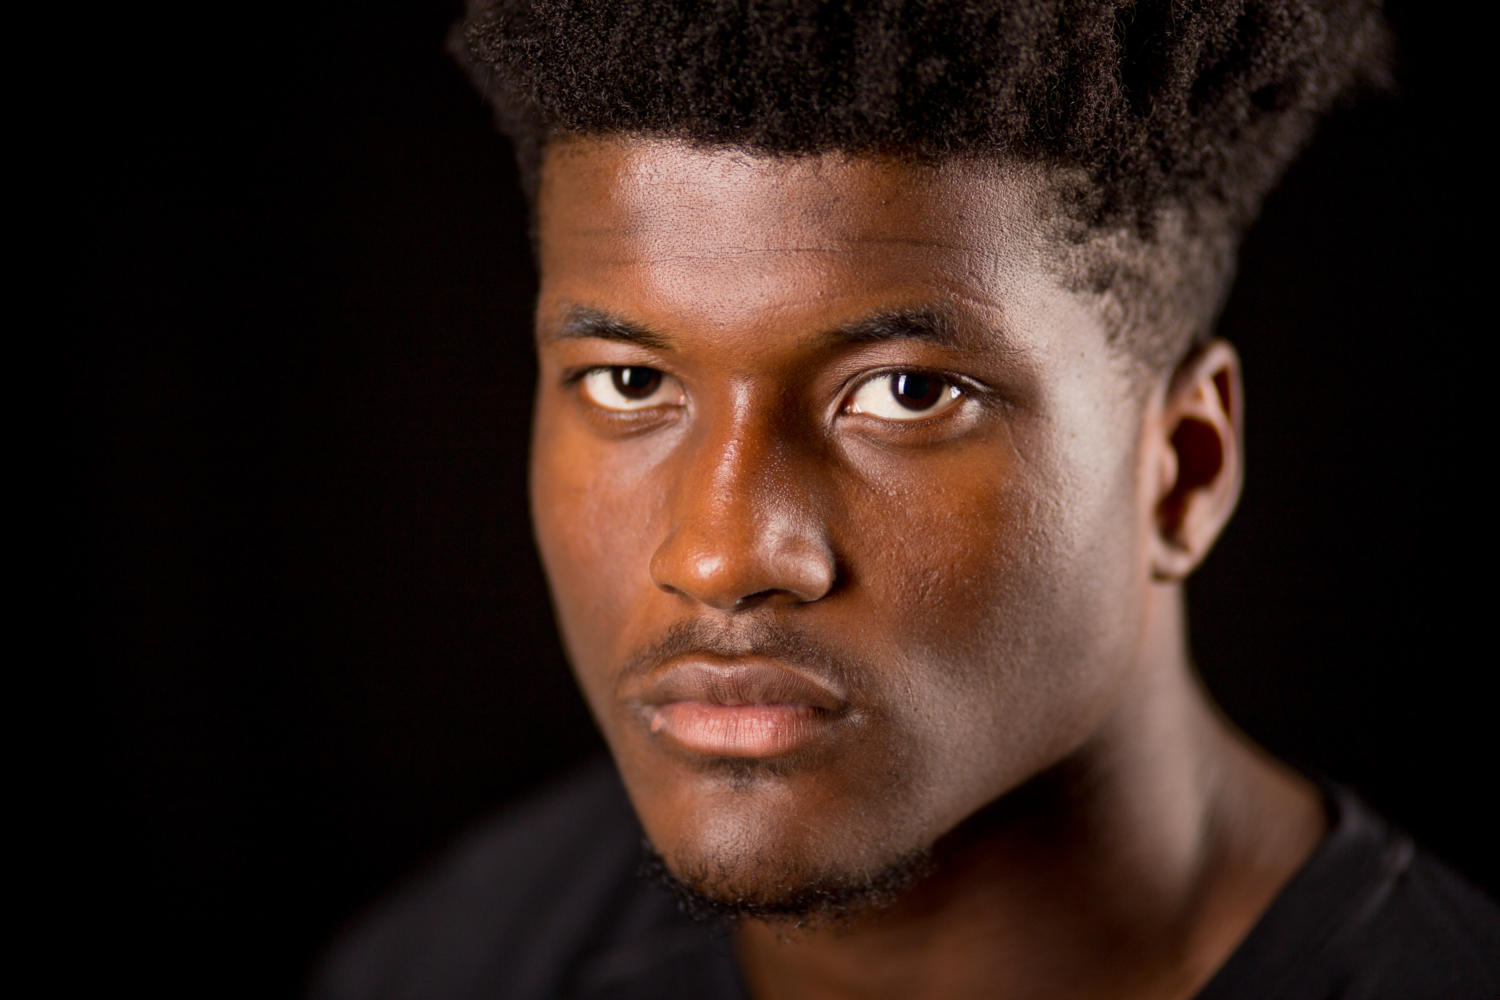 Raphael Leonard, of Starkville, Mississippi, poses for a portarit Monday, Sept. 18, 2017, at the Daily Egyptian photography studio. Leonard is a recent transfer from East Mississippi Community College and was on the Netflix original documentary series, Last Chance U.  (Brian Muñoz | @BrianMMunoz)